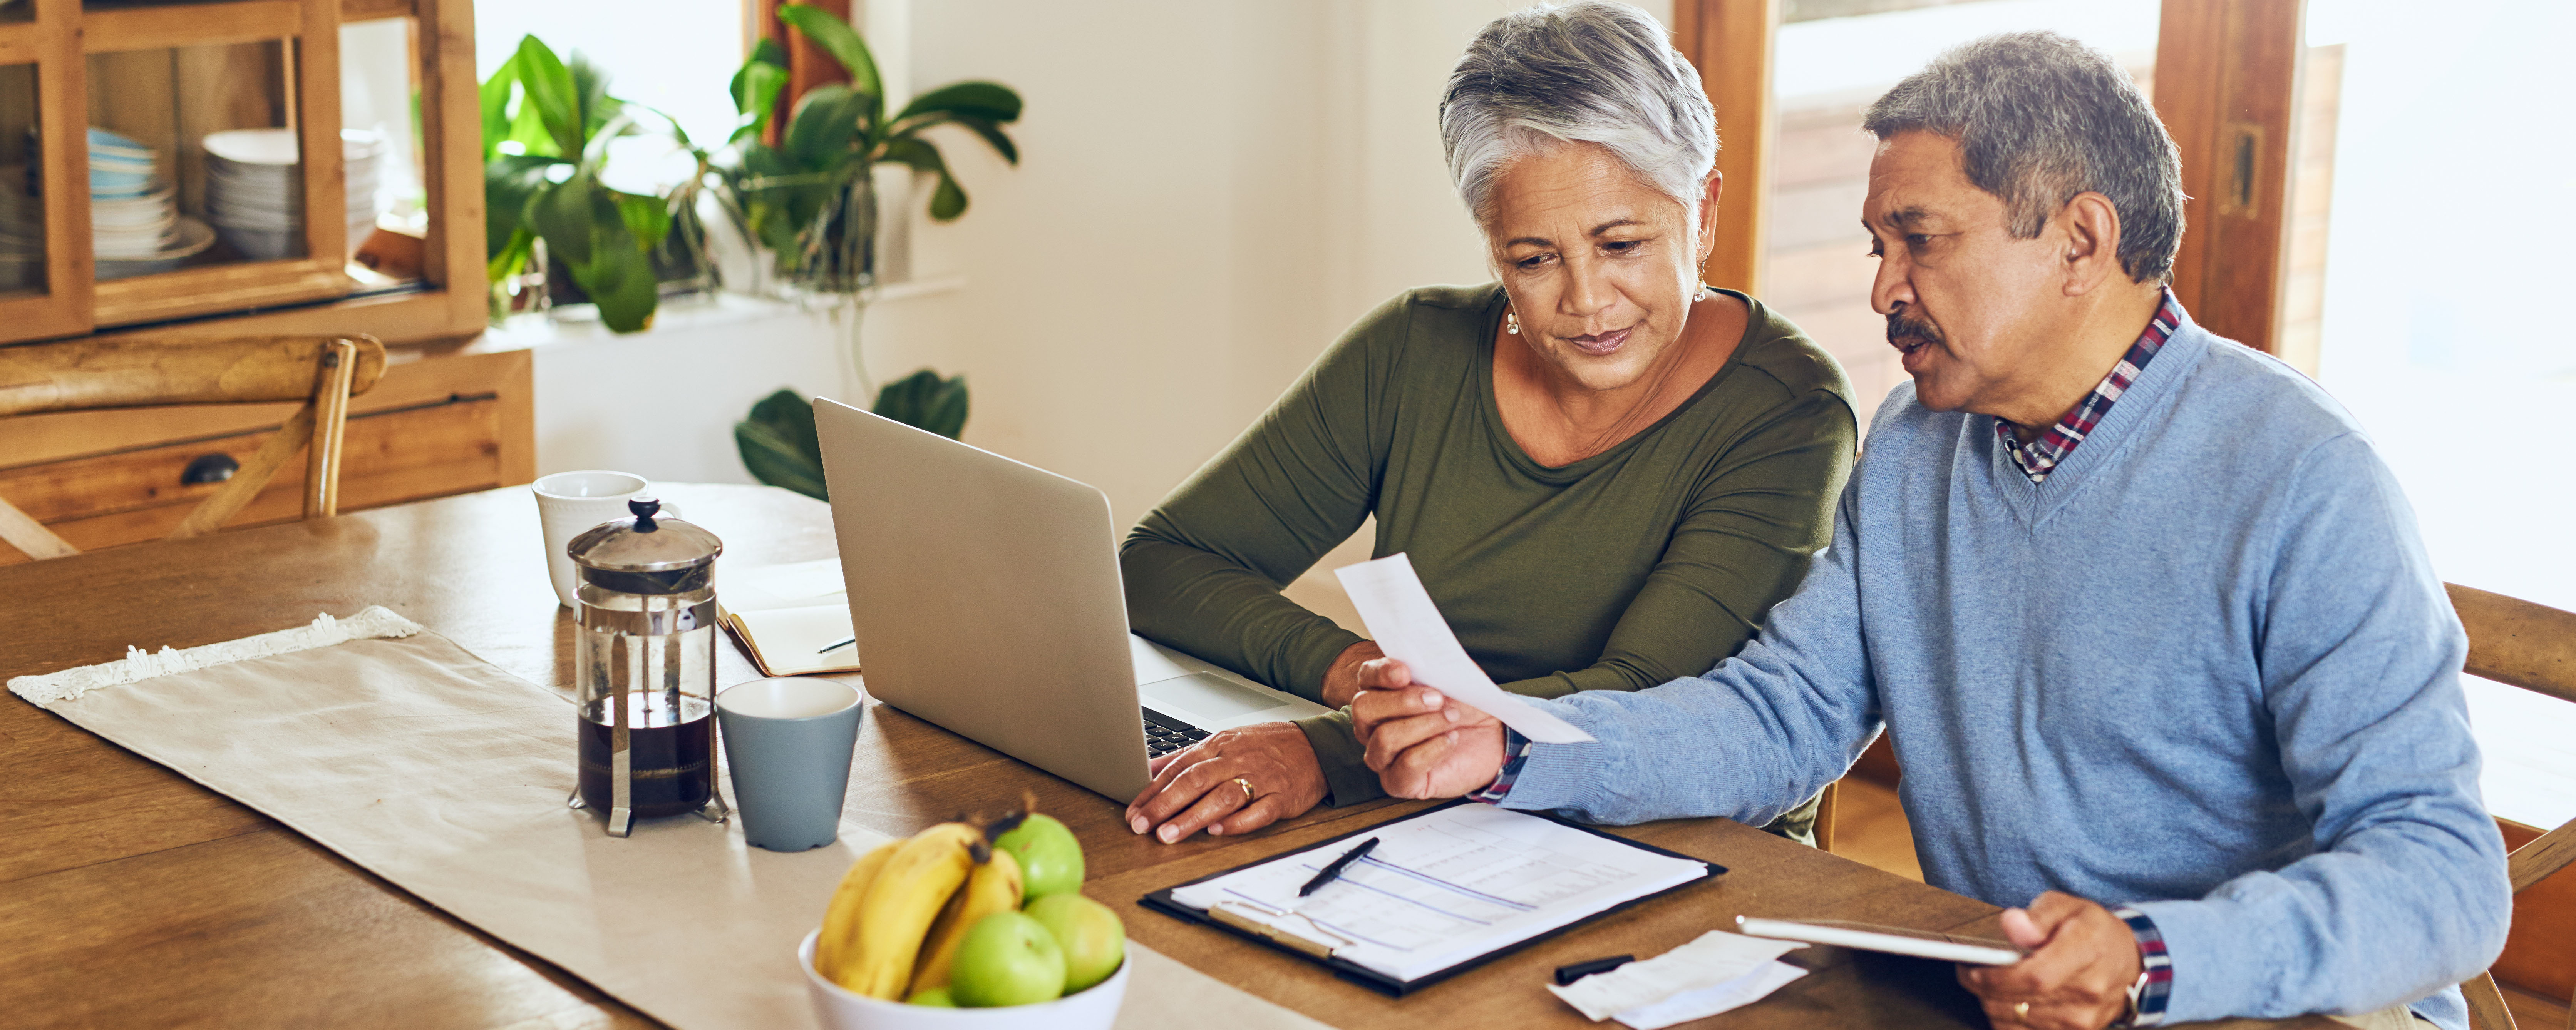 How To Make A Financial Plan For Retirement